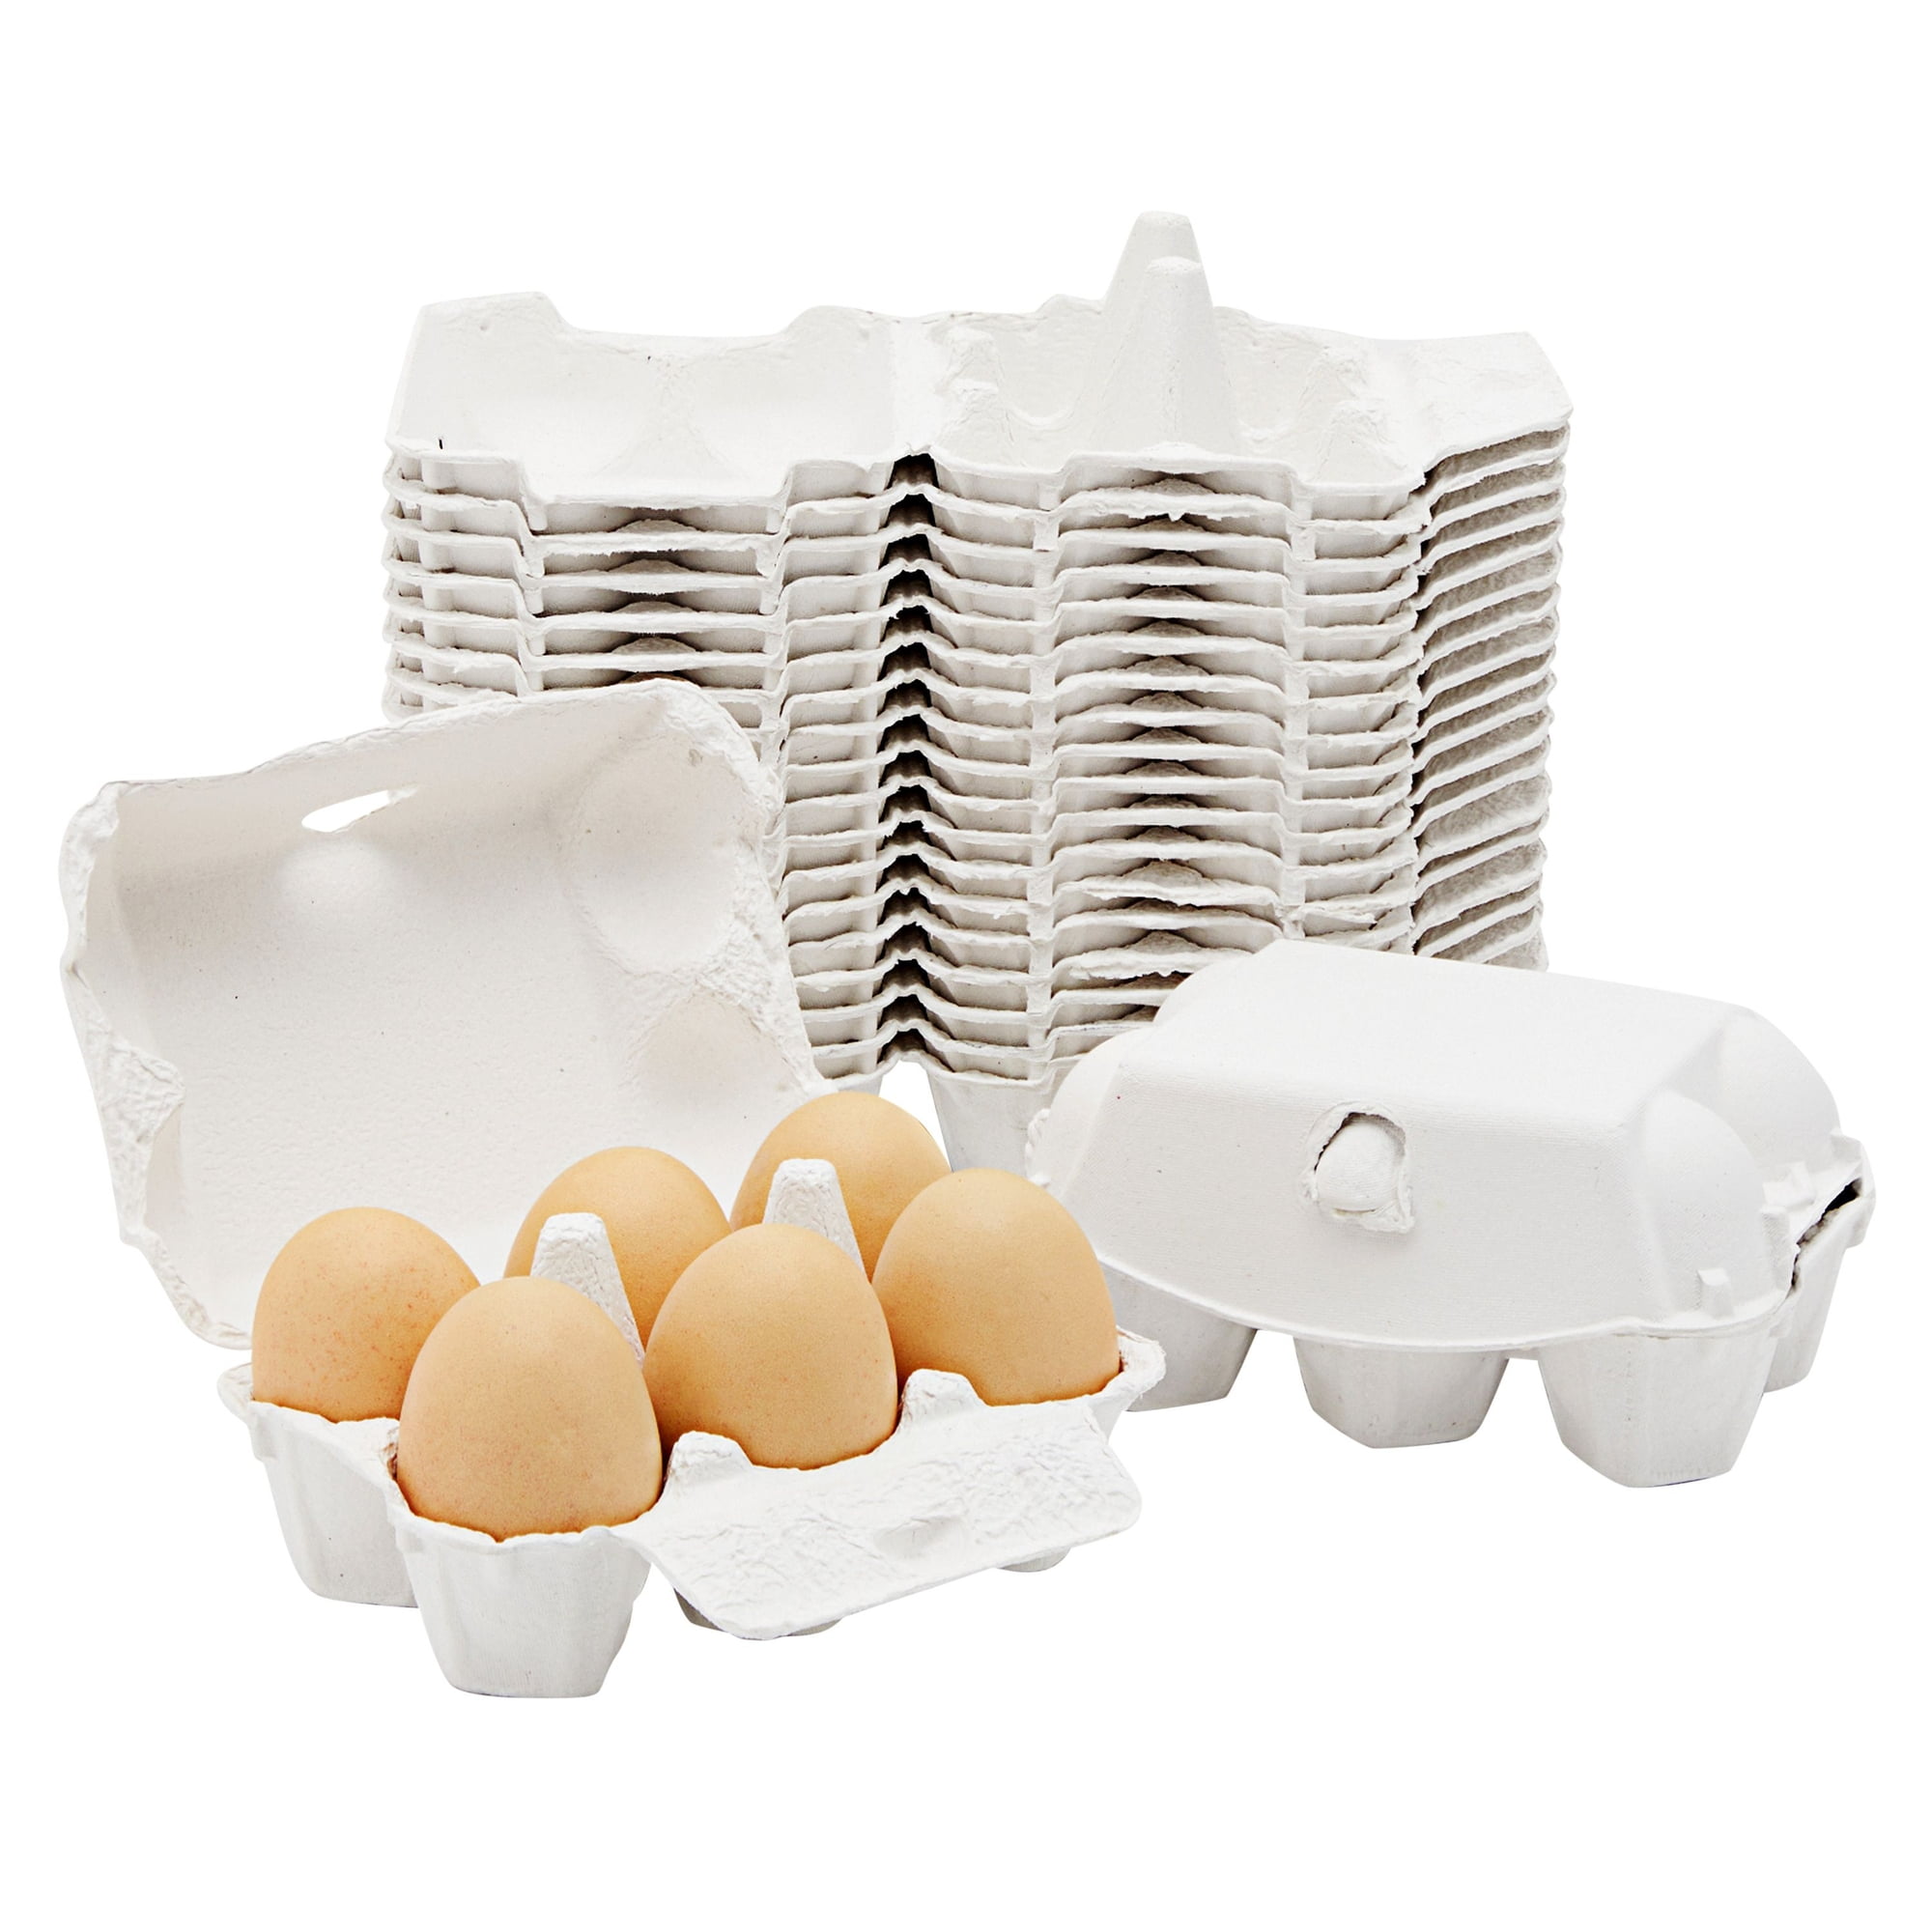  Egg Cartons for Chicken Eggs 25 Pack, 6 Pulp Fiber Egg Carrier  Egg Storage Containers for Home, Kitchen, Farmhouse, Reusable (25pc) by  MESHKA… : Home & Kitchen